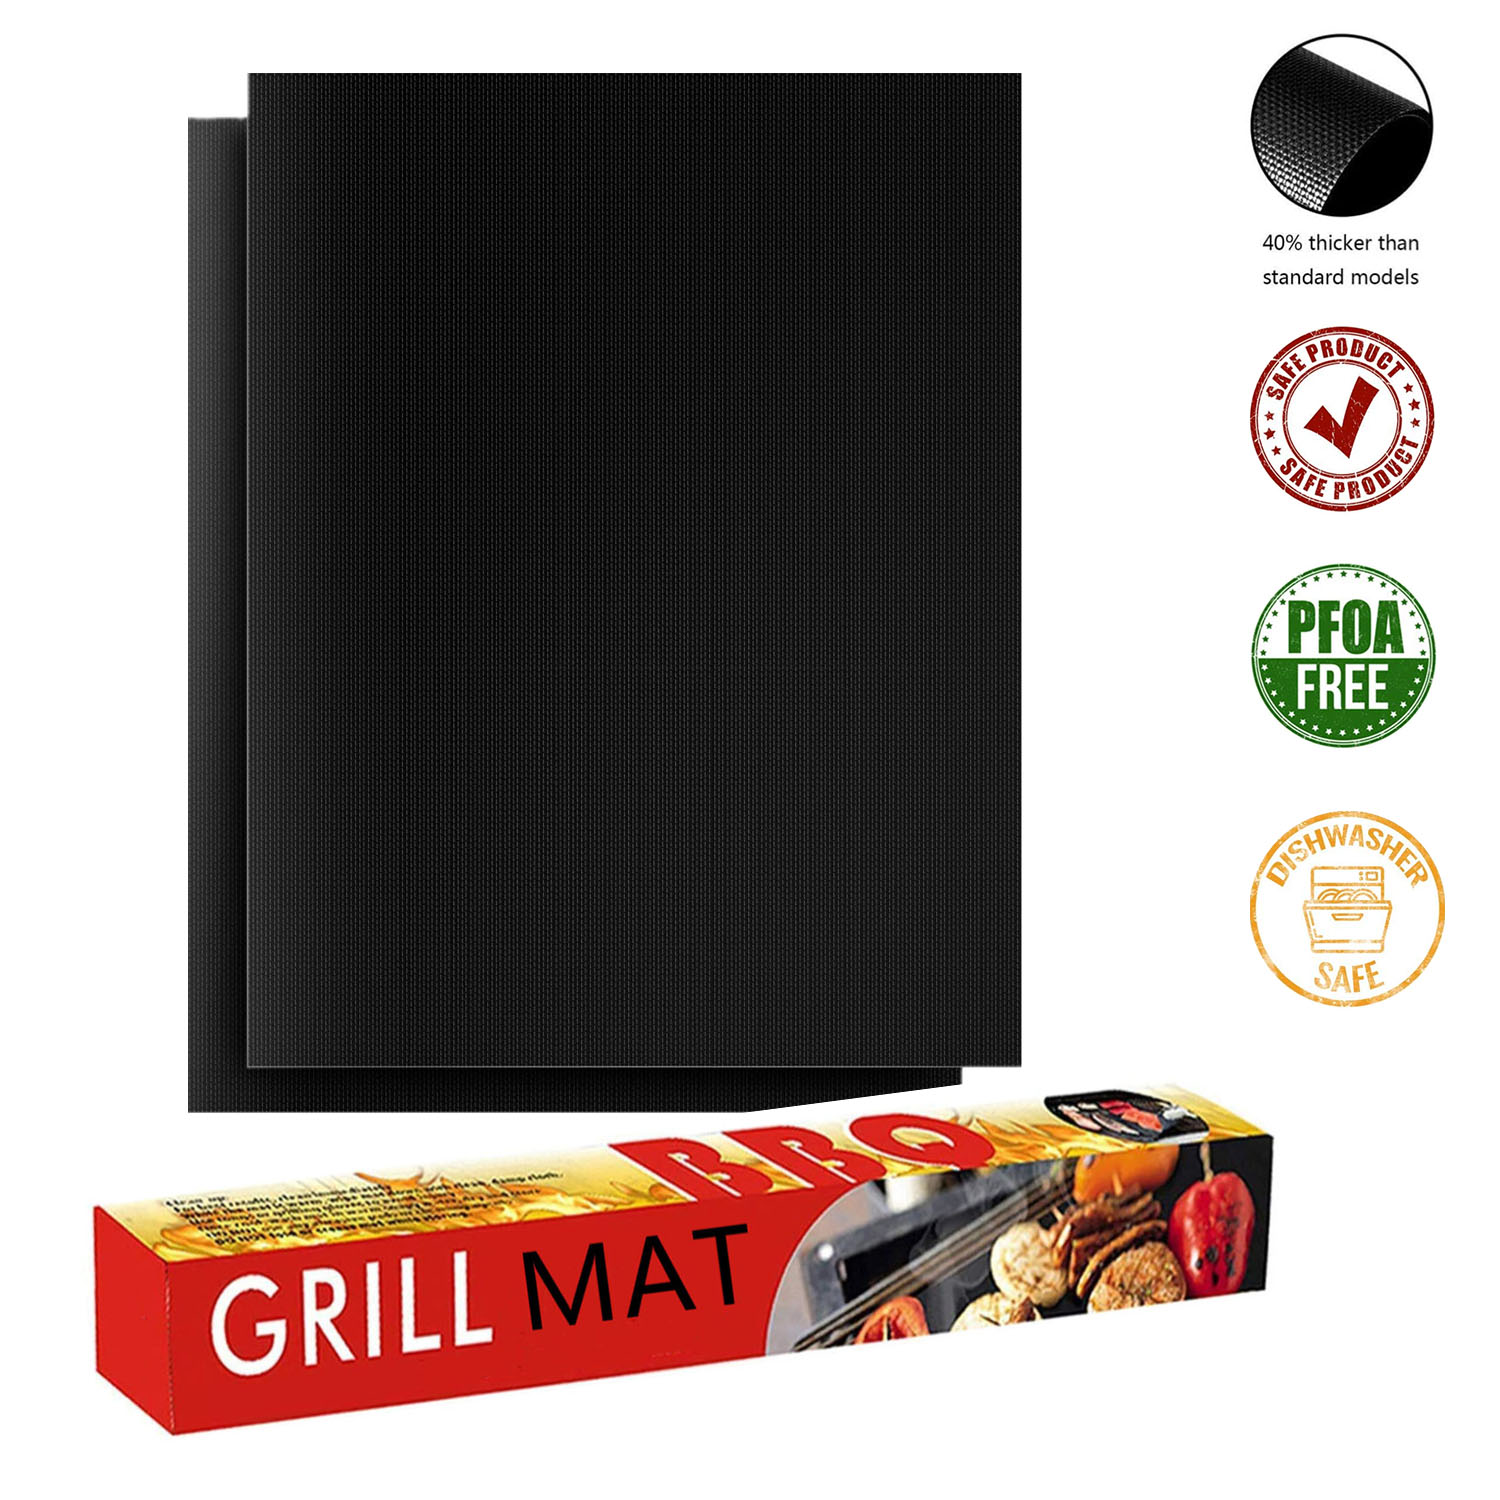 BBQ Grill Mat Non Stick - Set of 2 Heavy Duty Reusable and Dishwasher Safe Black Fireproof Topper Pads - Easy Clean and Easy Use on Gas Charcoal Electric Grills, 15.75 x 13-Inch - image 1 of 7